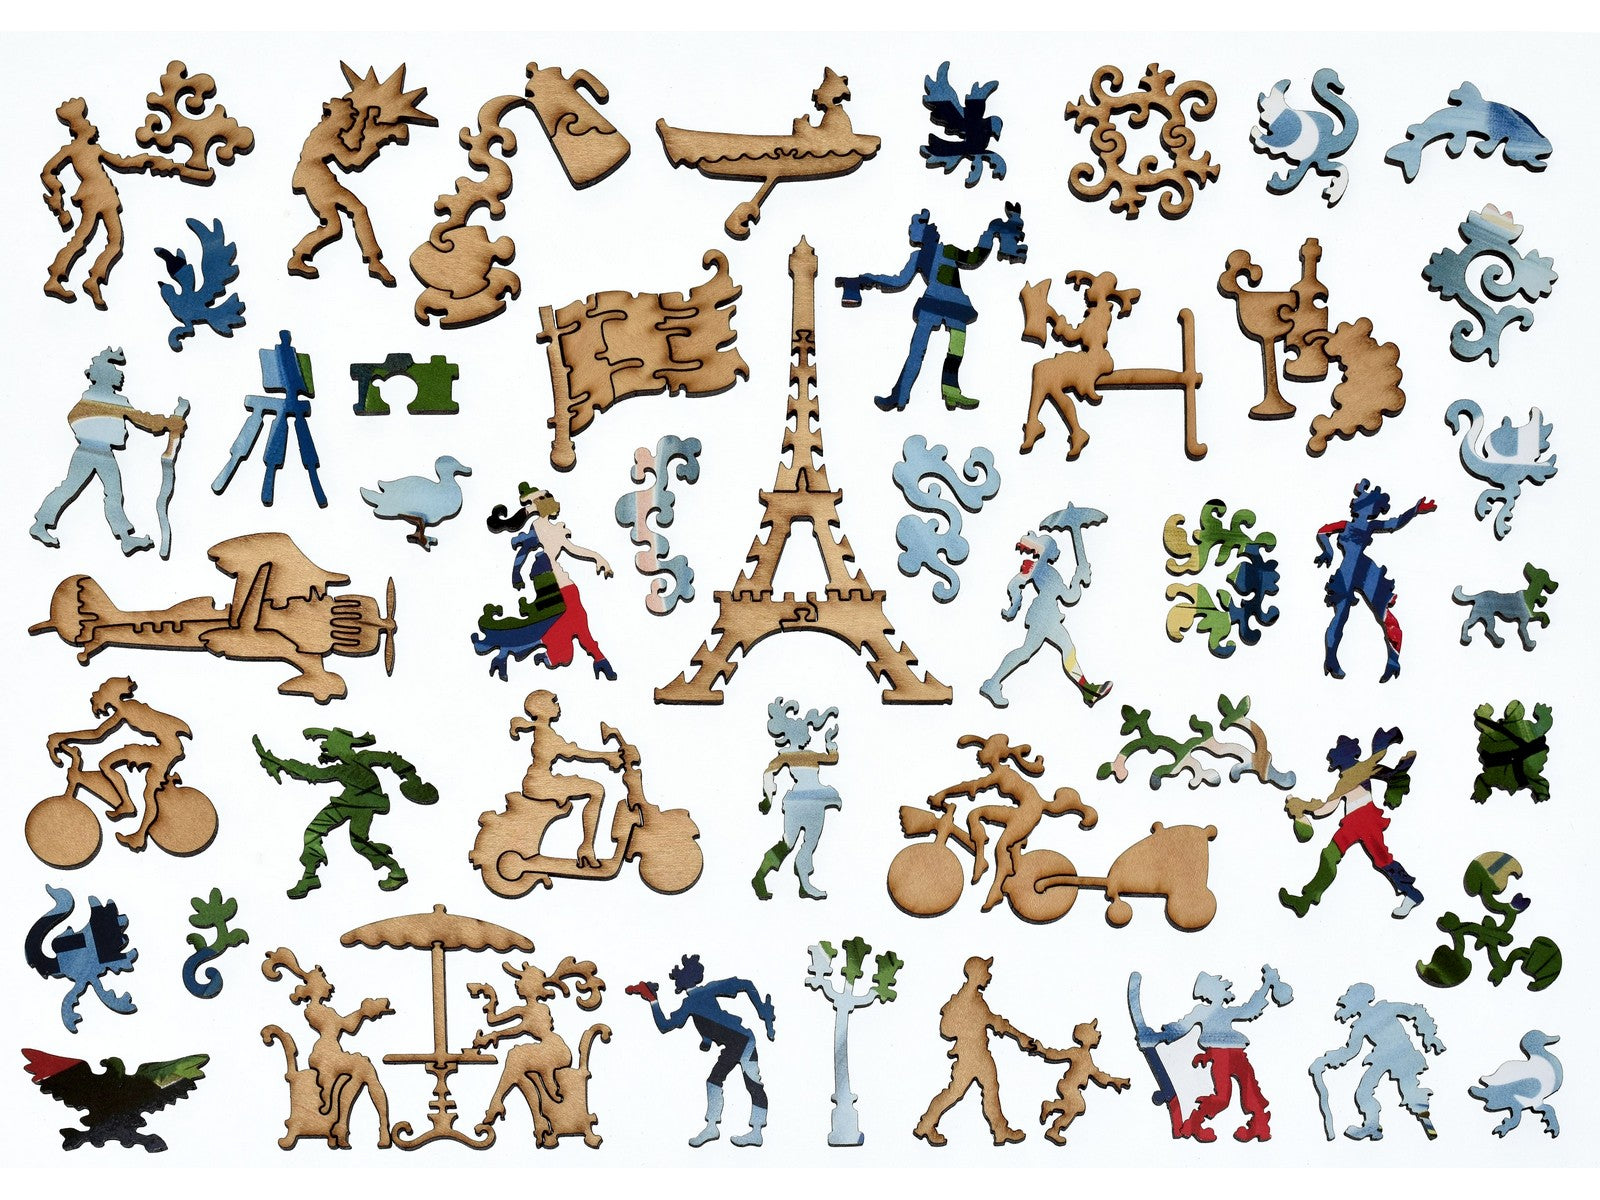 The whimsies that can be found in the puzzle, Paris Air France.